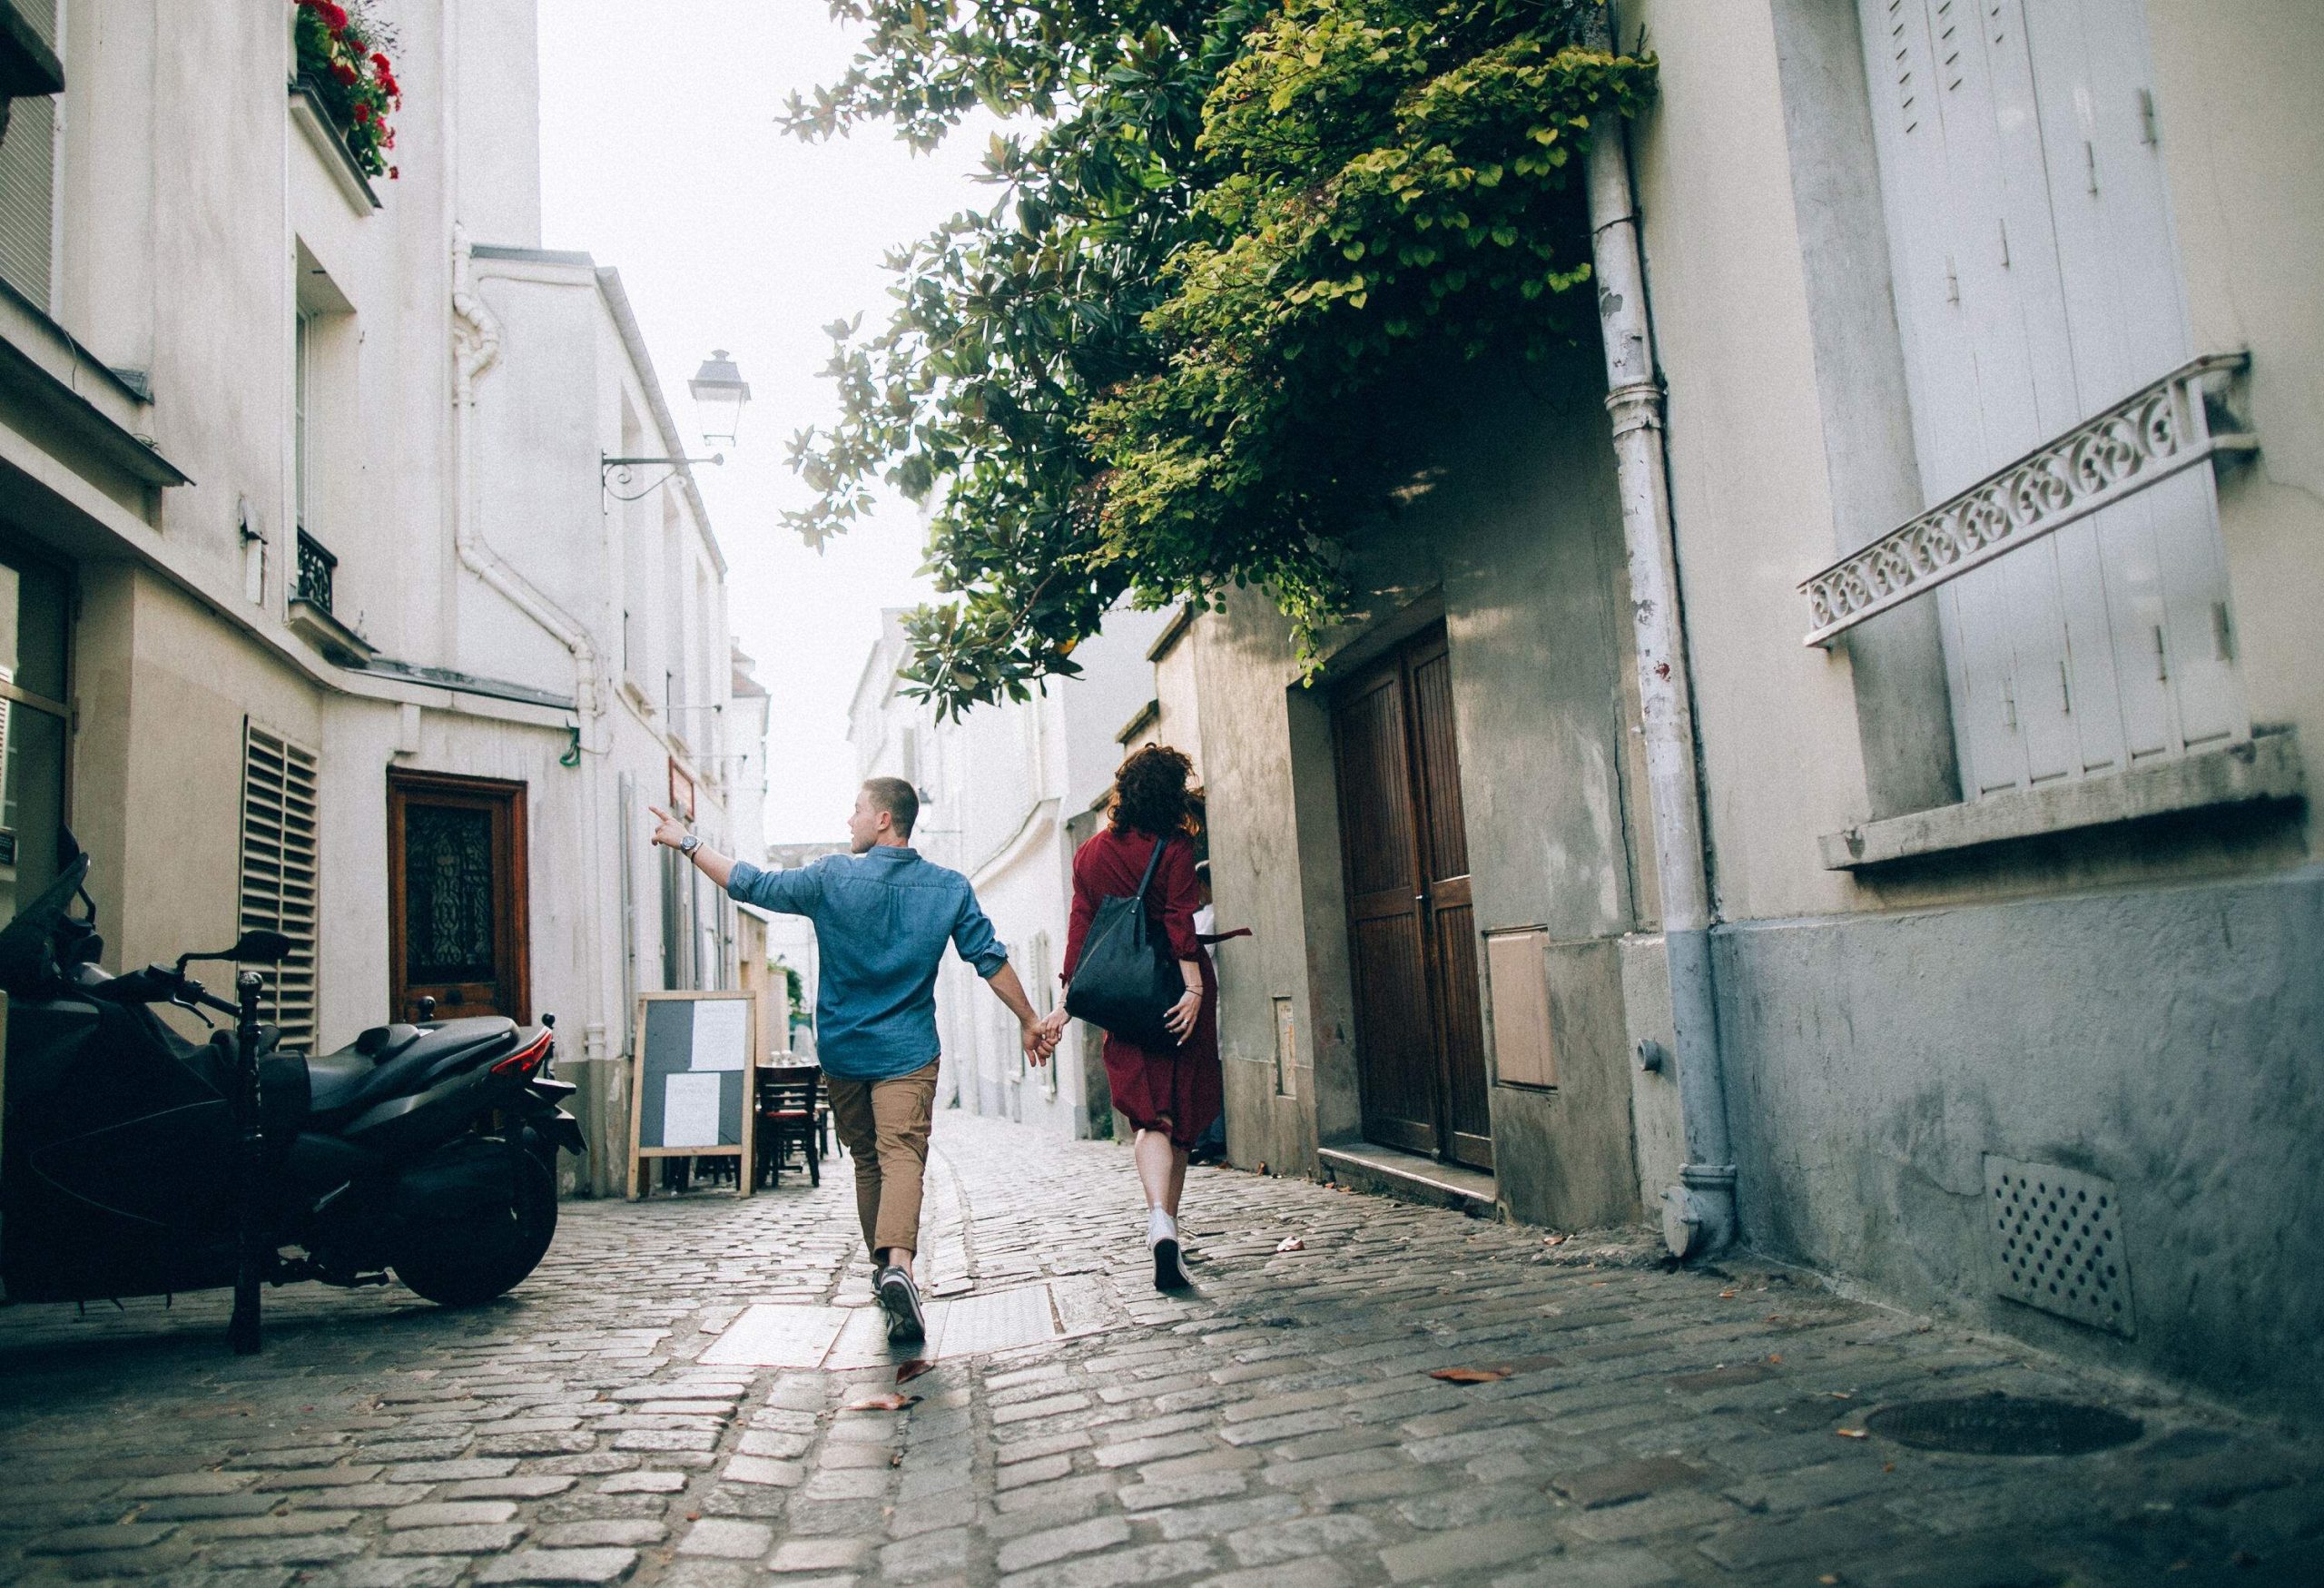 A couple walking hand in hand in a narrow cobbled street lined with old buildings.